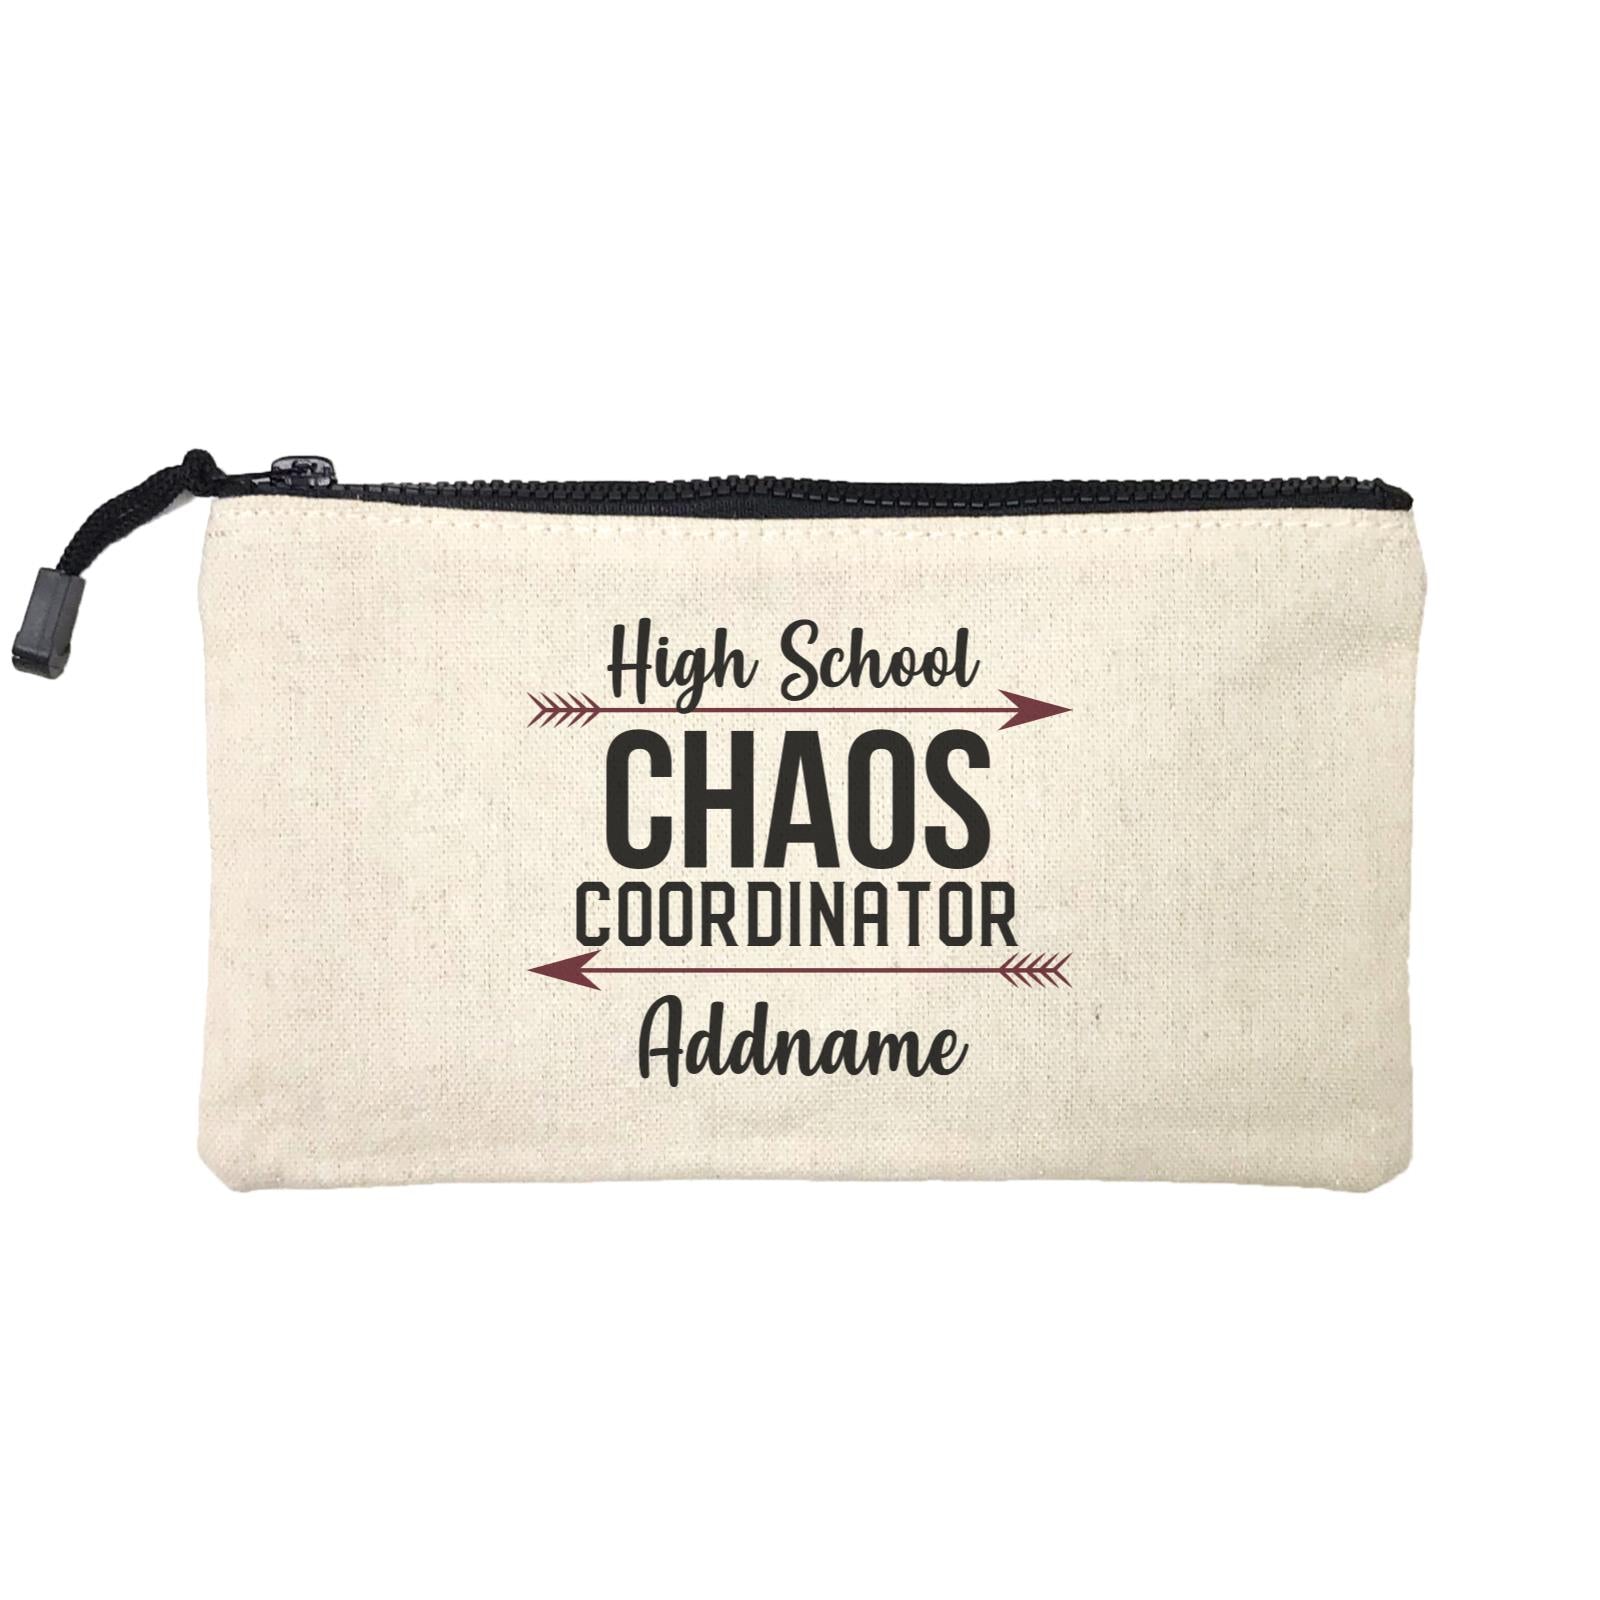 Chaos Coordinator Series High School Mini Accessories Stationery Pouch